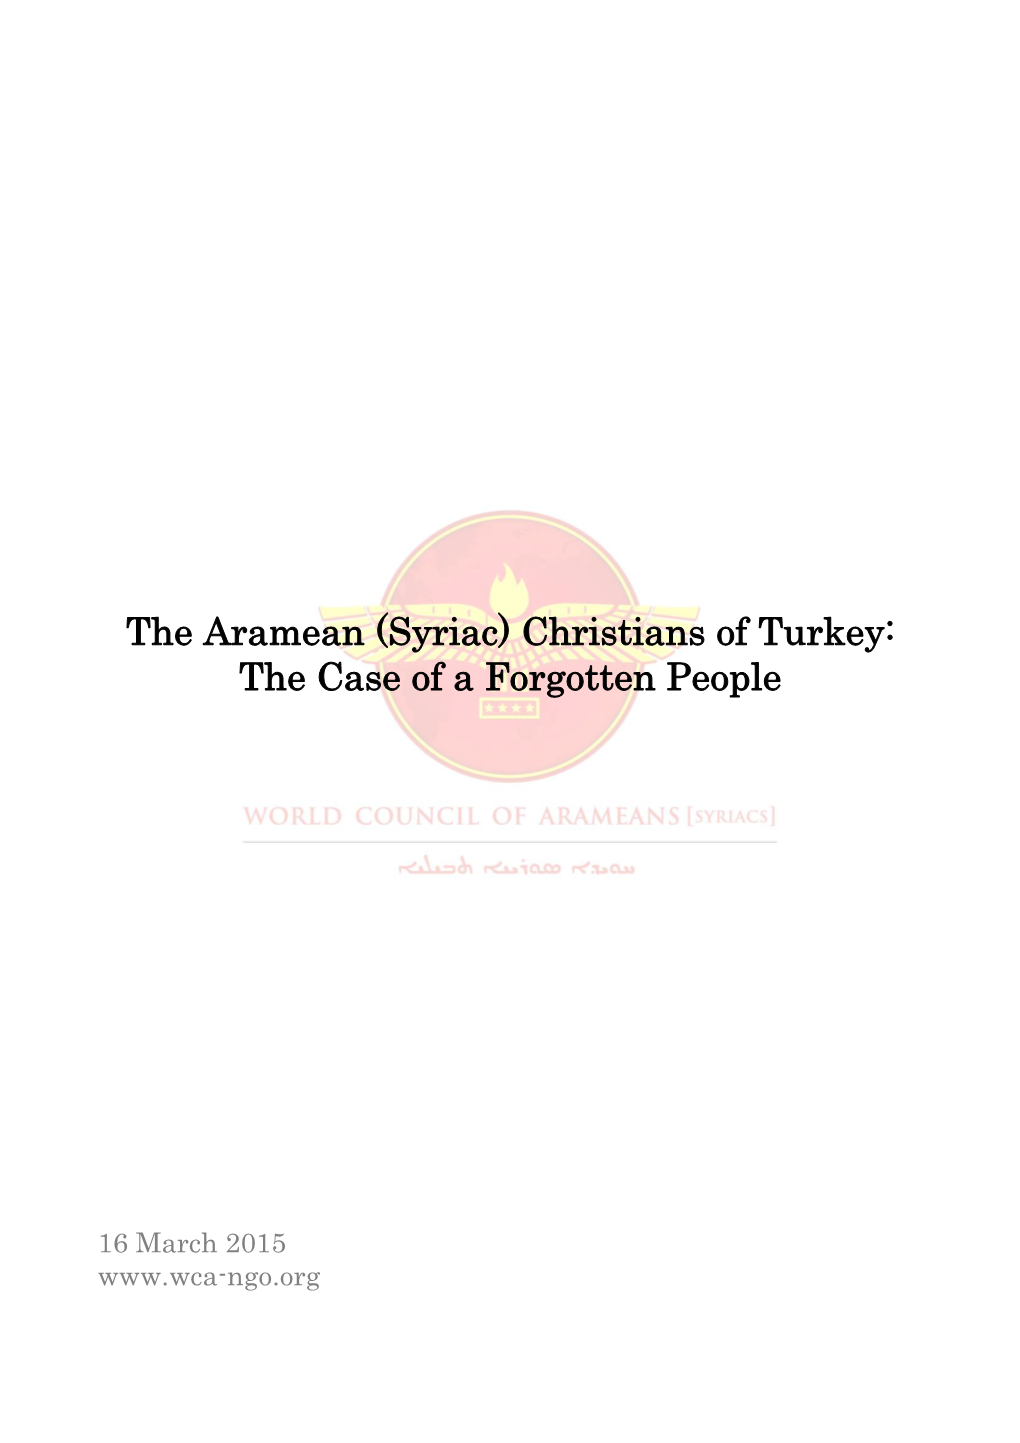 The Aramean (Syriac) Christians of Turkey: the Case of a Forgotten People